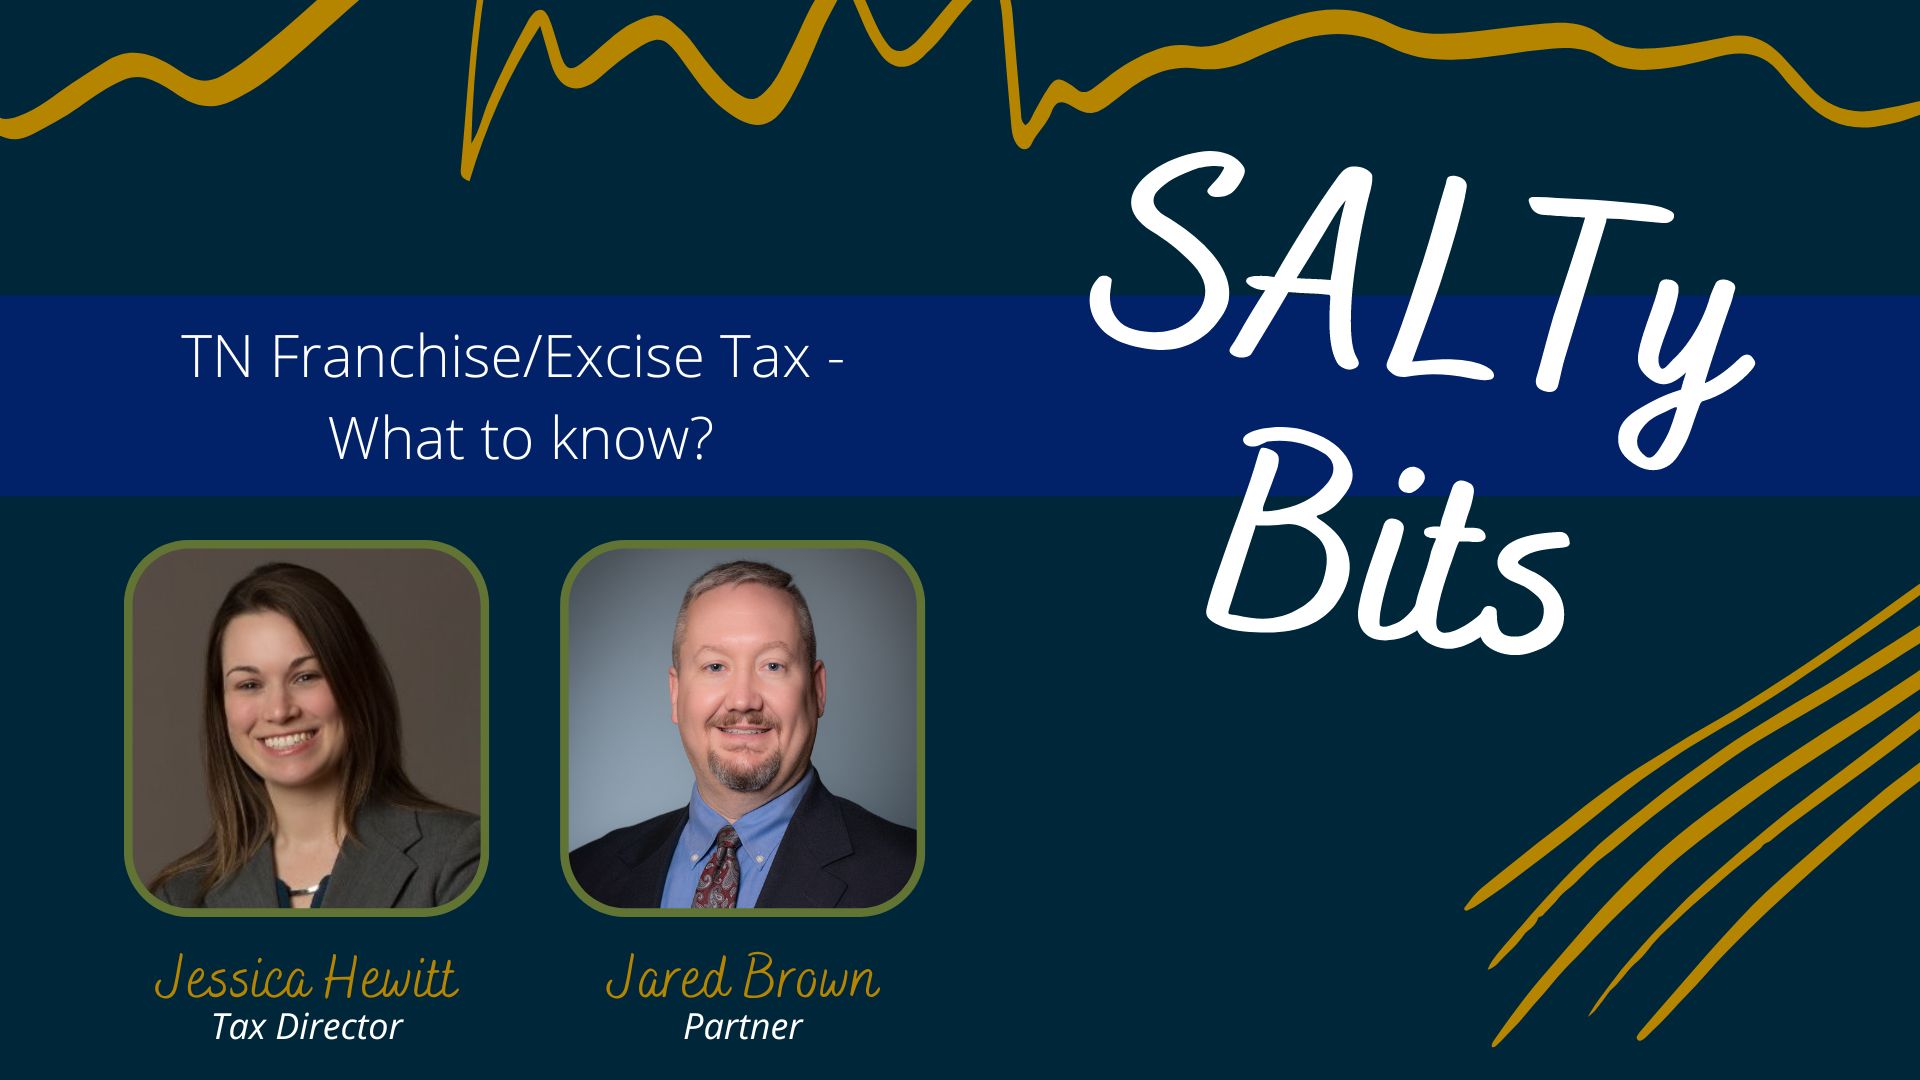 Tennessee Franchise/Excise Tax - What to know?